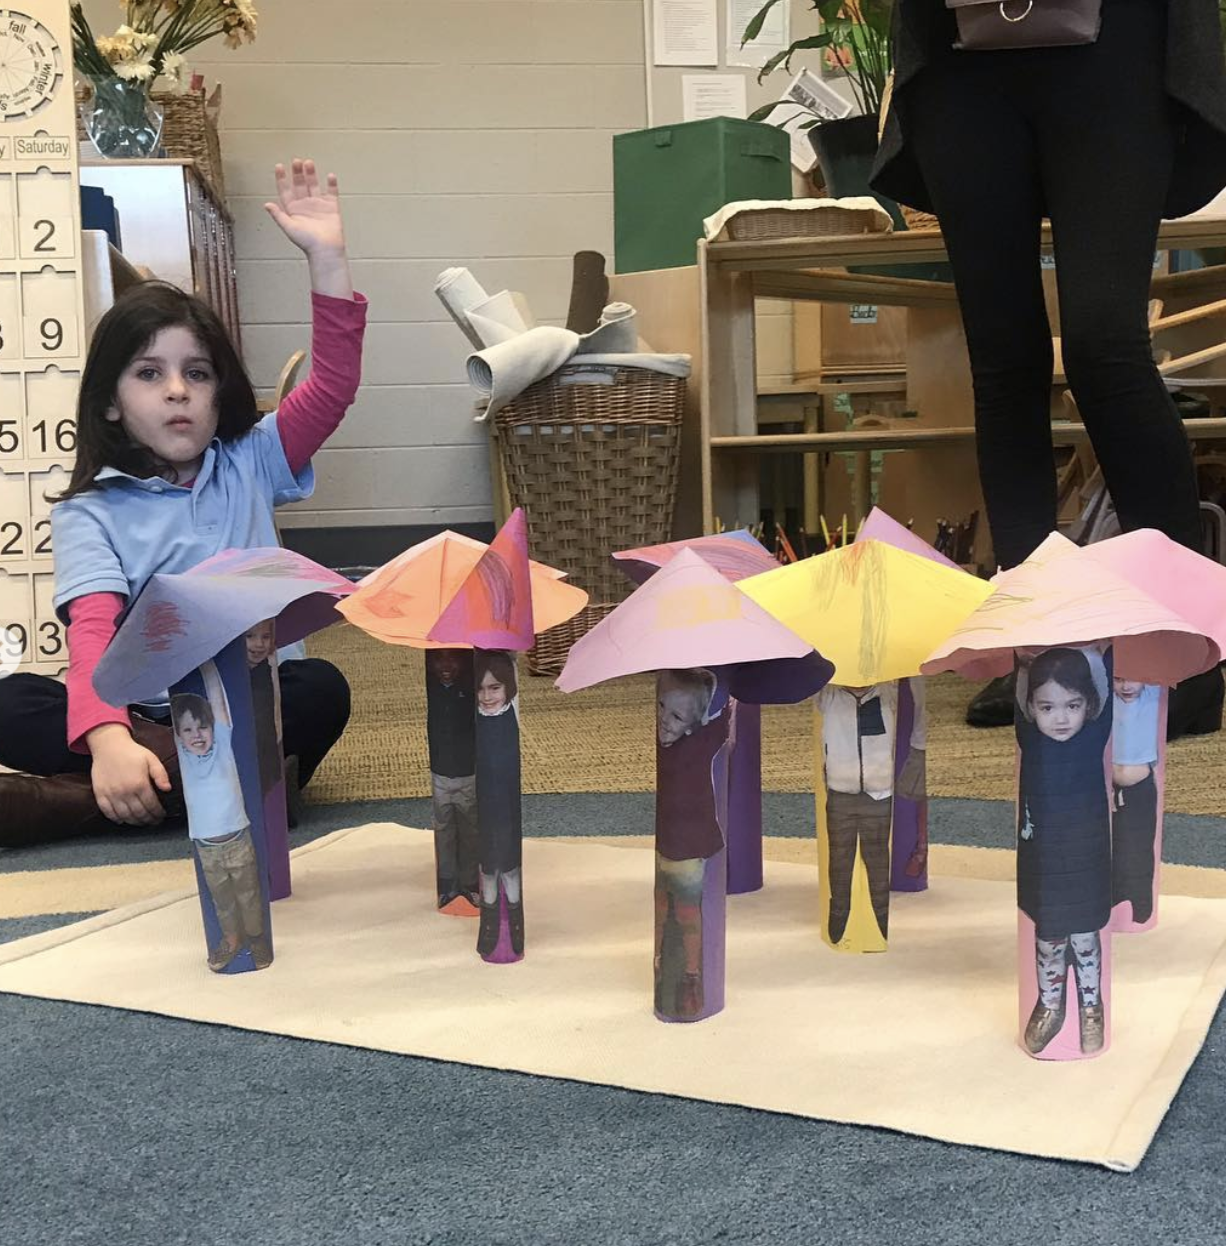  The teacher and students at James Simons Elementary School are working on a mushrooms curriculum in preparation for THE FUNGUS AMONG US, opening March 14  @reduxartcenter . The students are studying mycelium, growing mushroom logs and making 🍄 scul